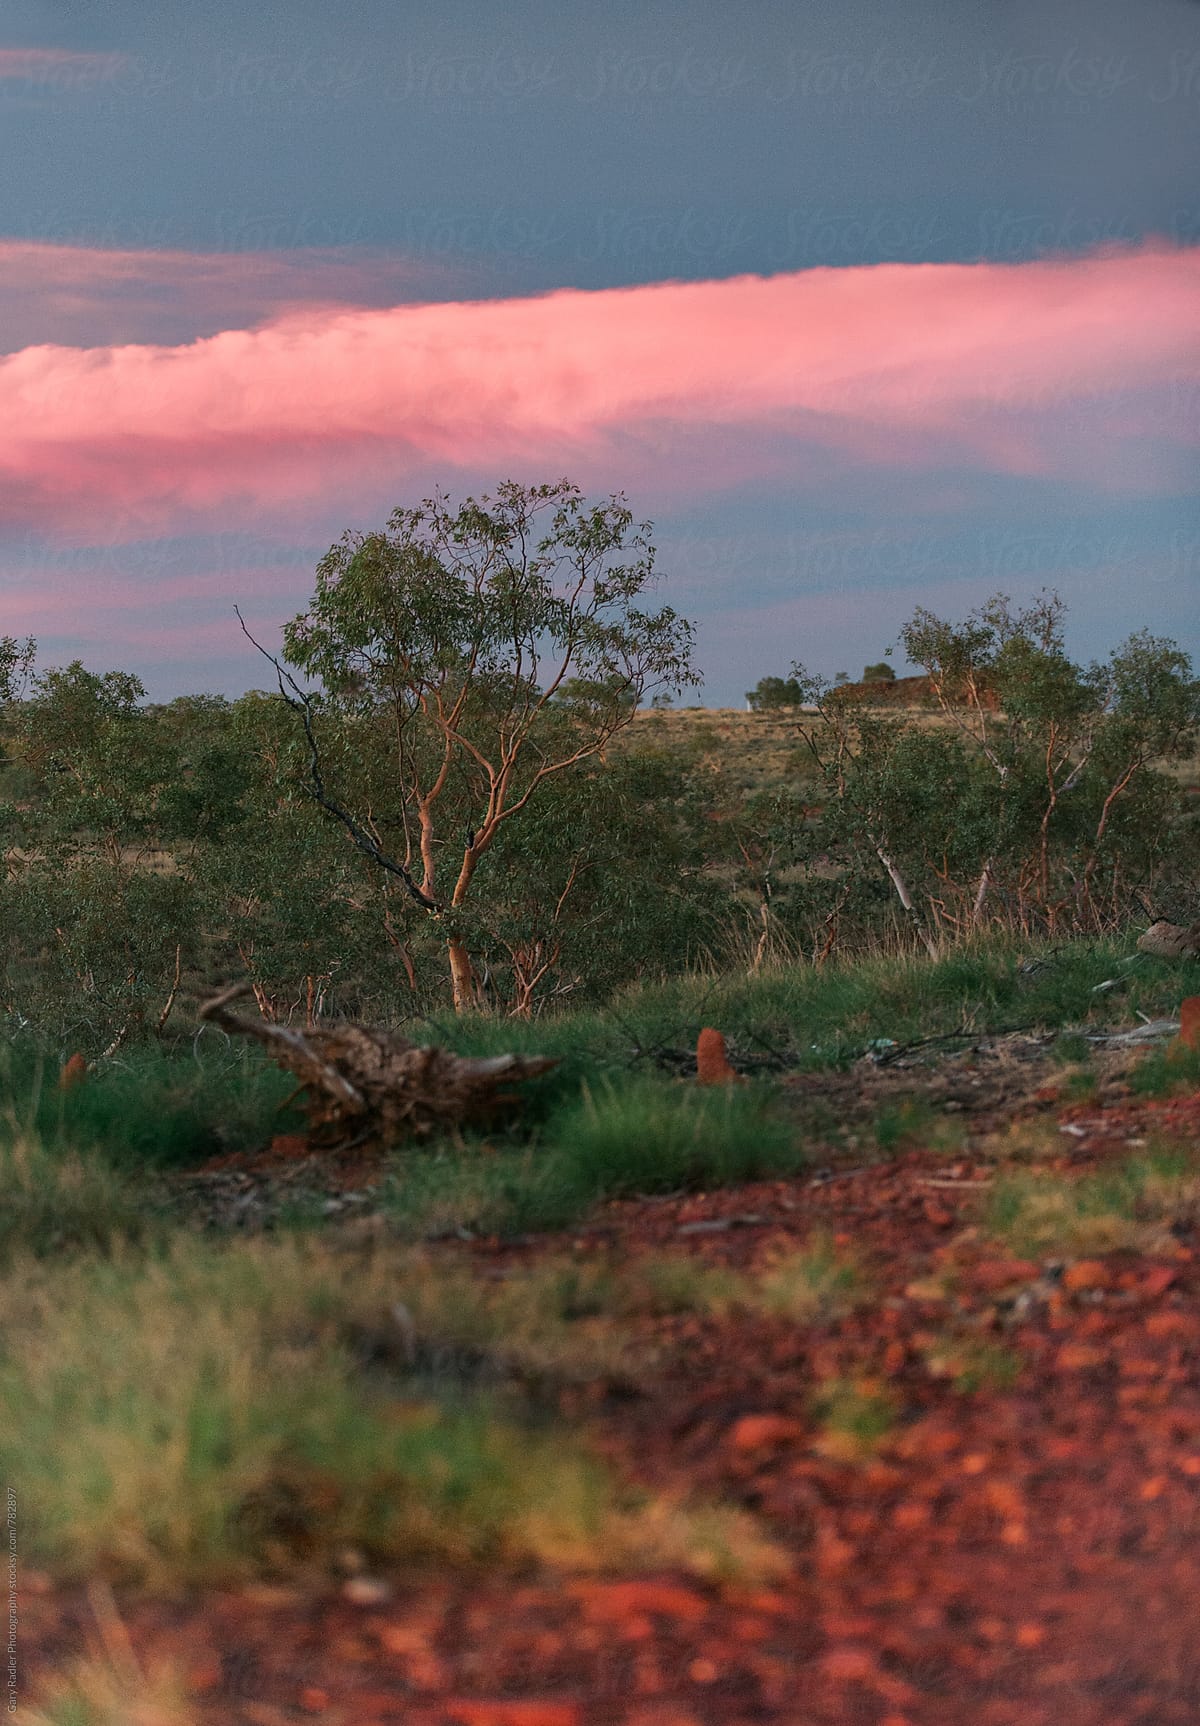 Pink Cloud over The Outback